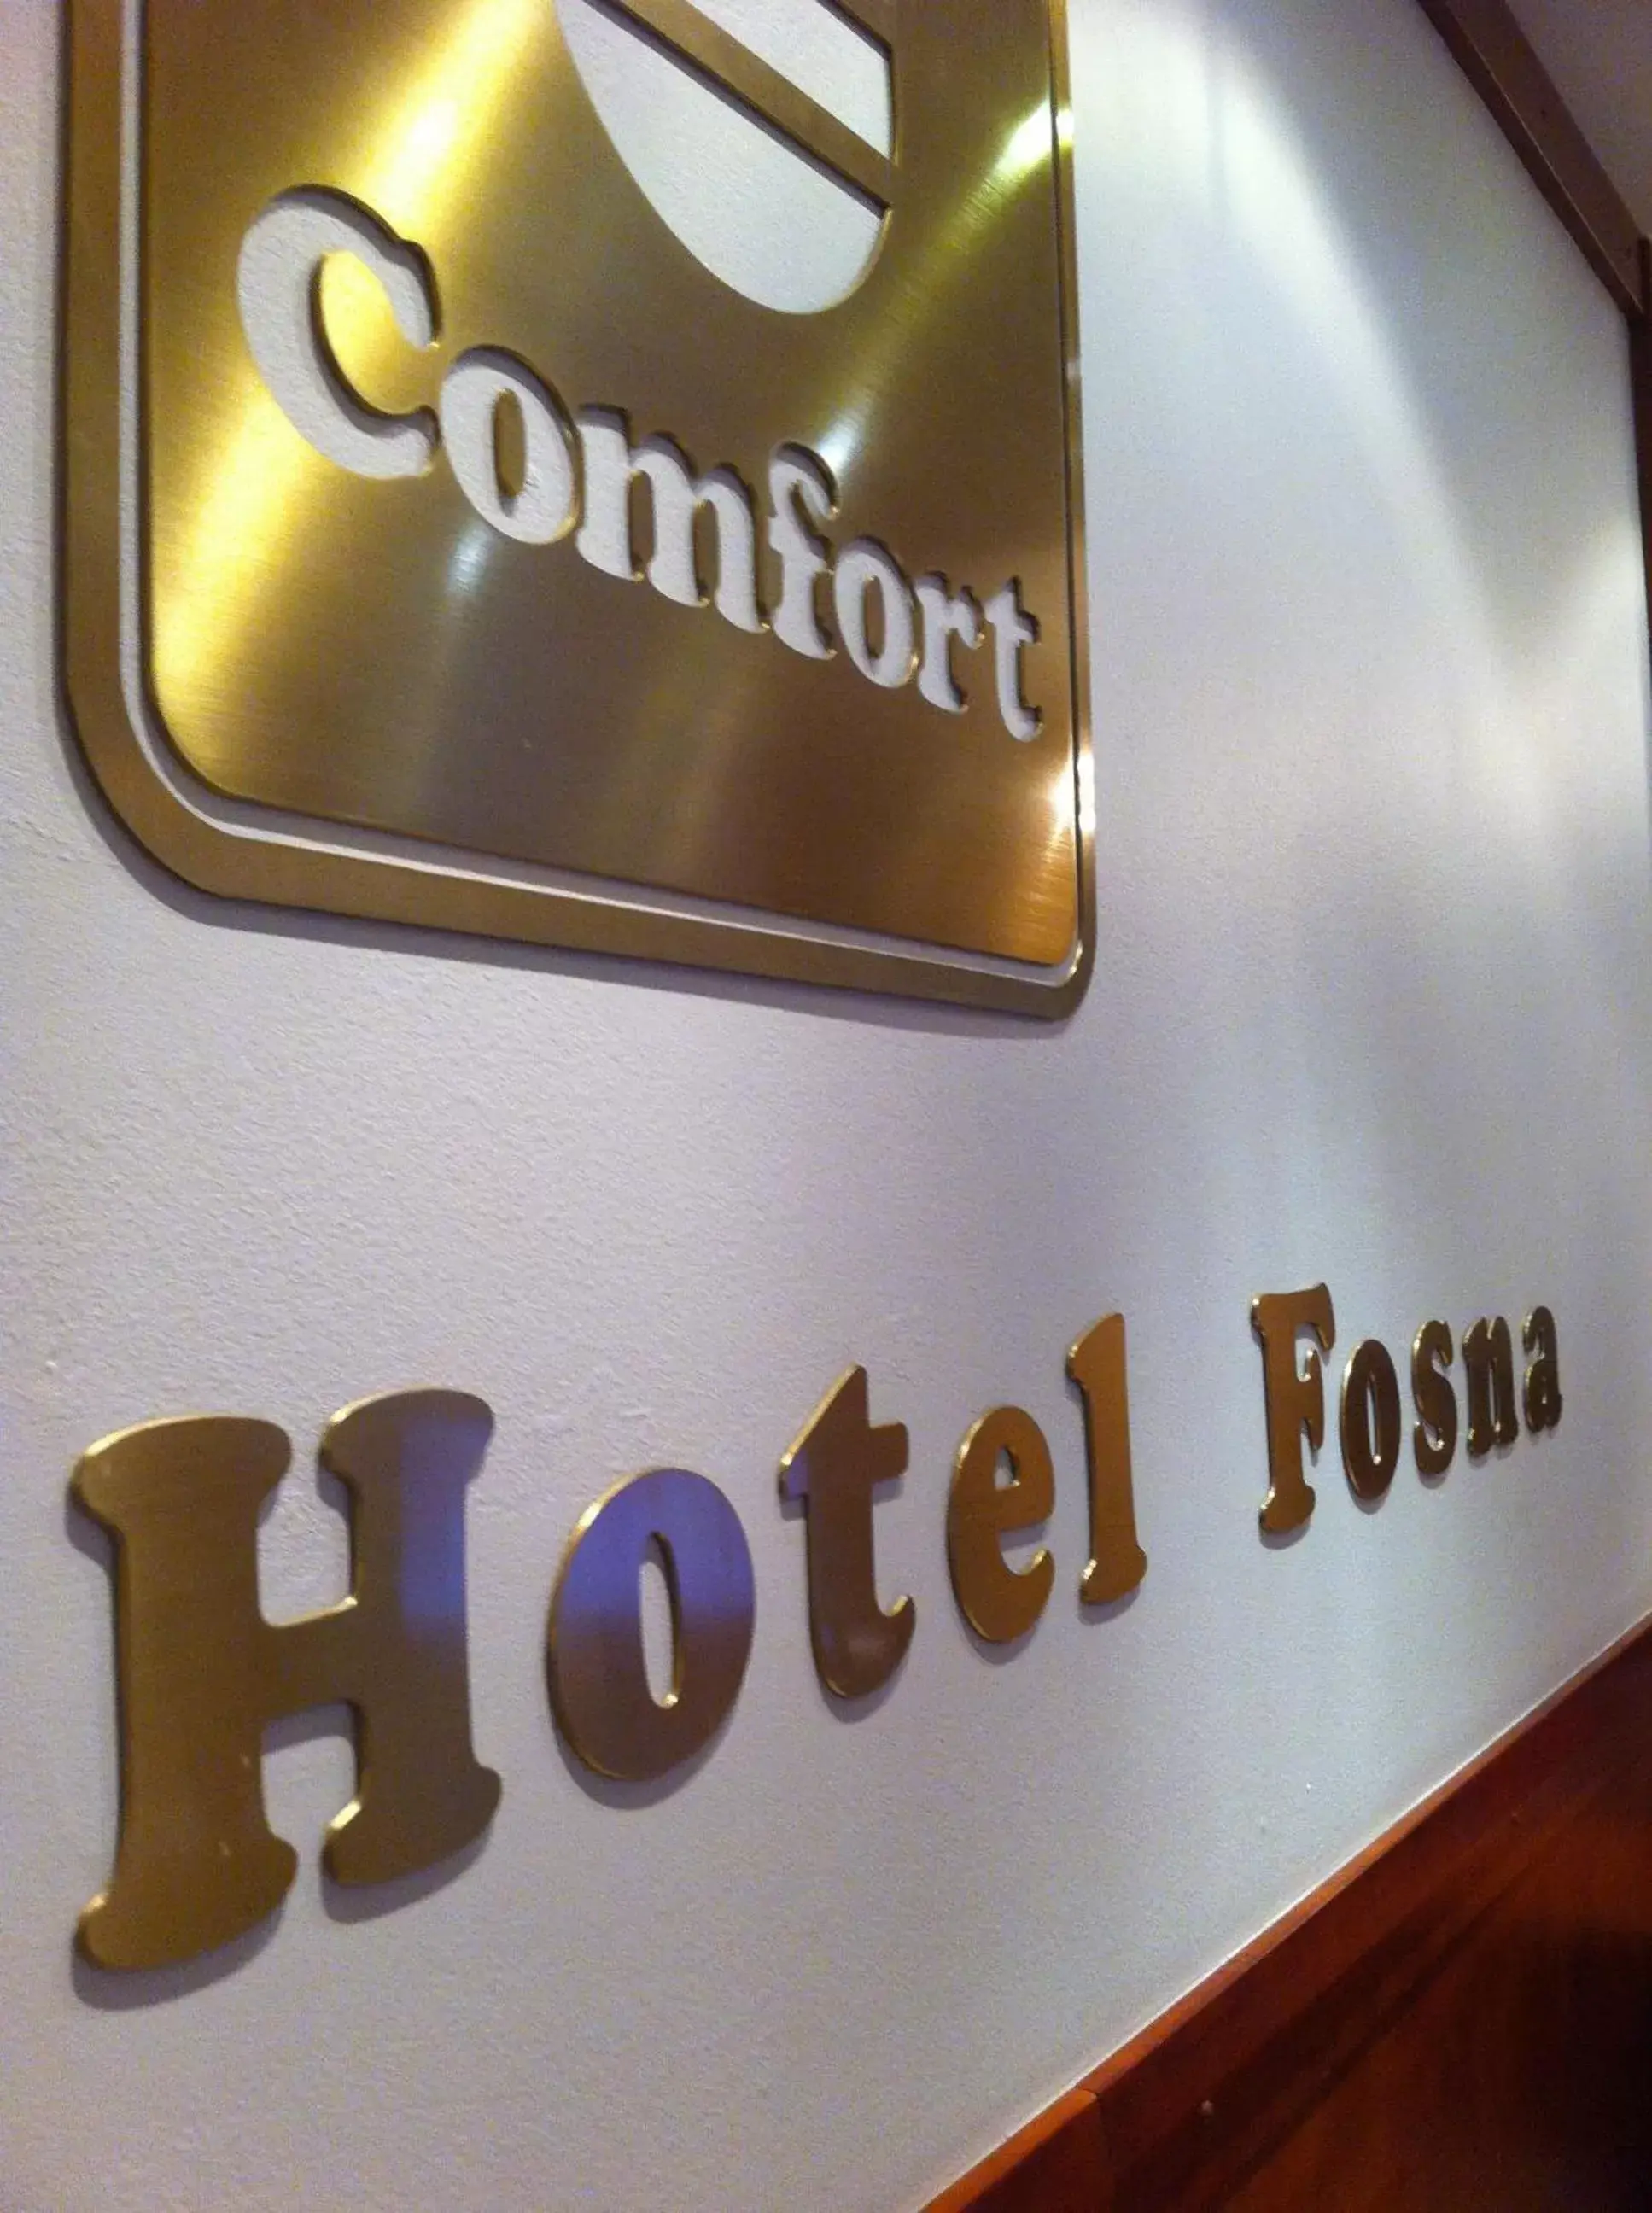 Other in Comfort Hotel Fosna